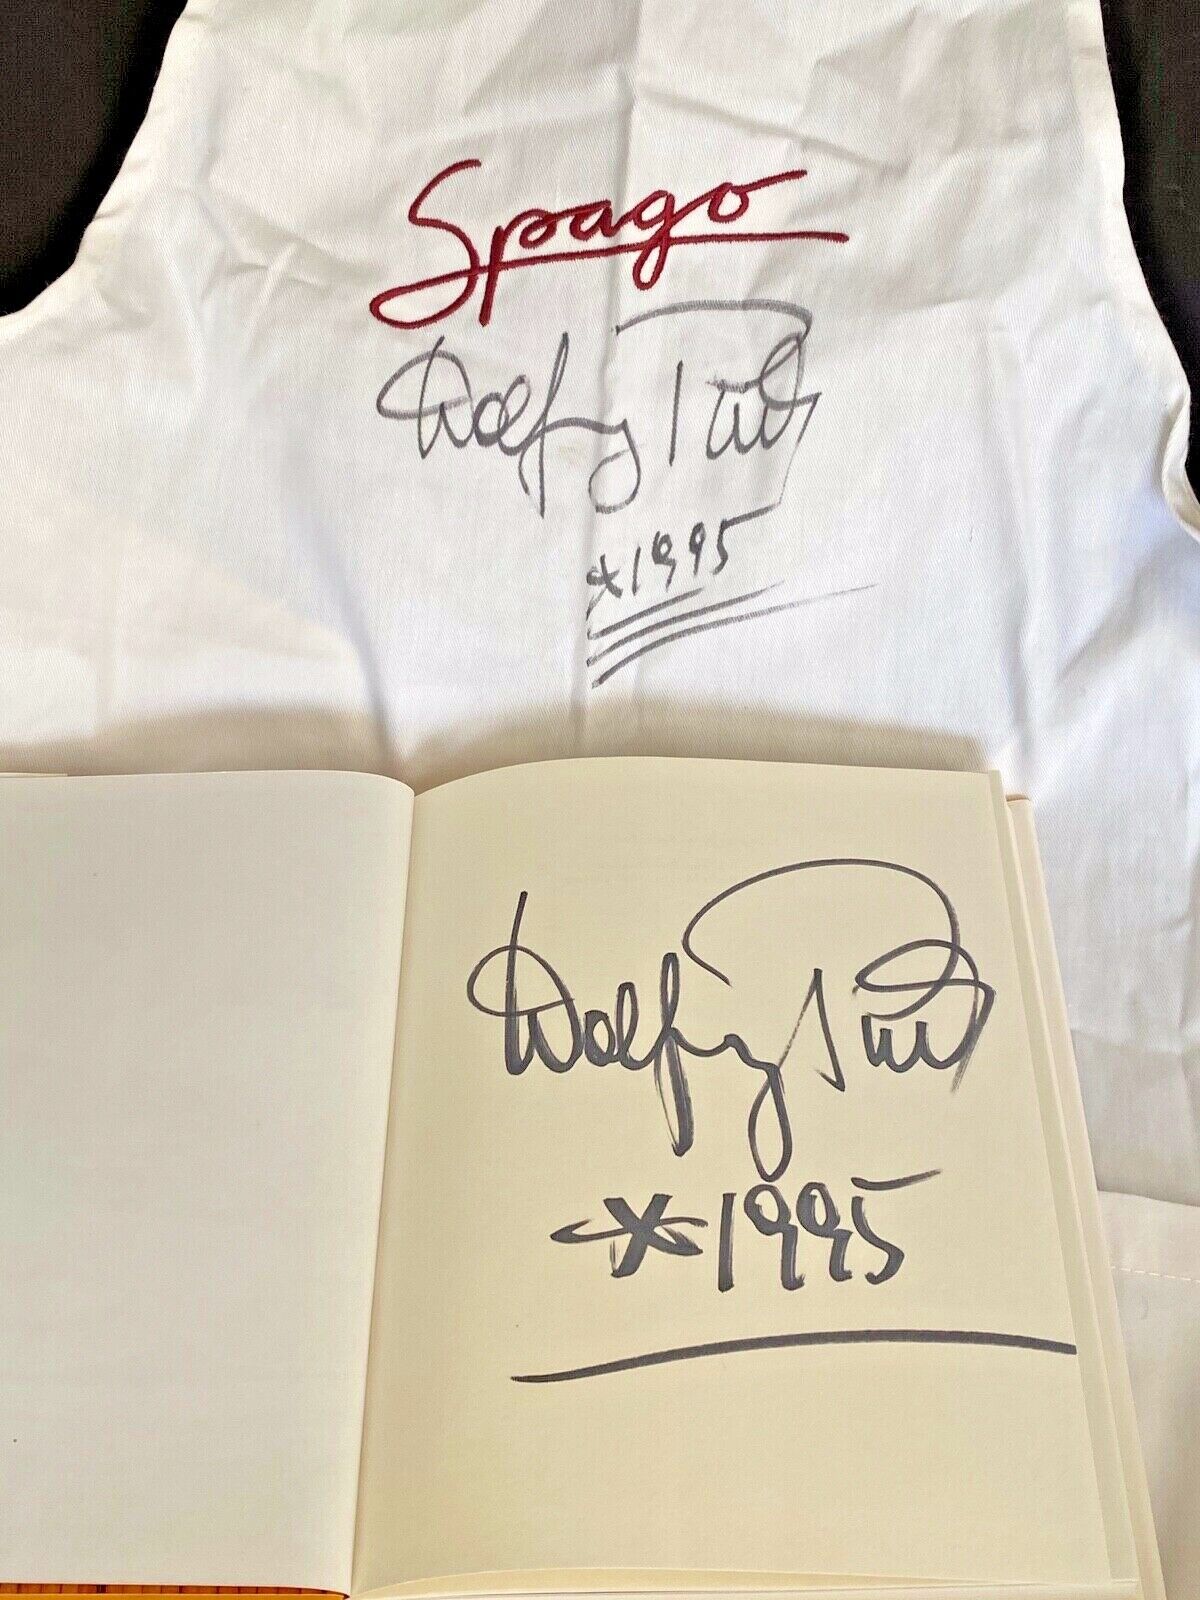 WOLFGANG PUCK SIGNED "SPAGO" APRON + "ADVENTURES IN THE KITCHEN" BOOK Без бренда - фотография #7